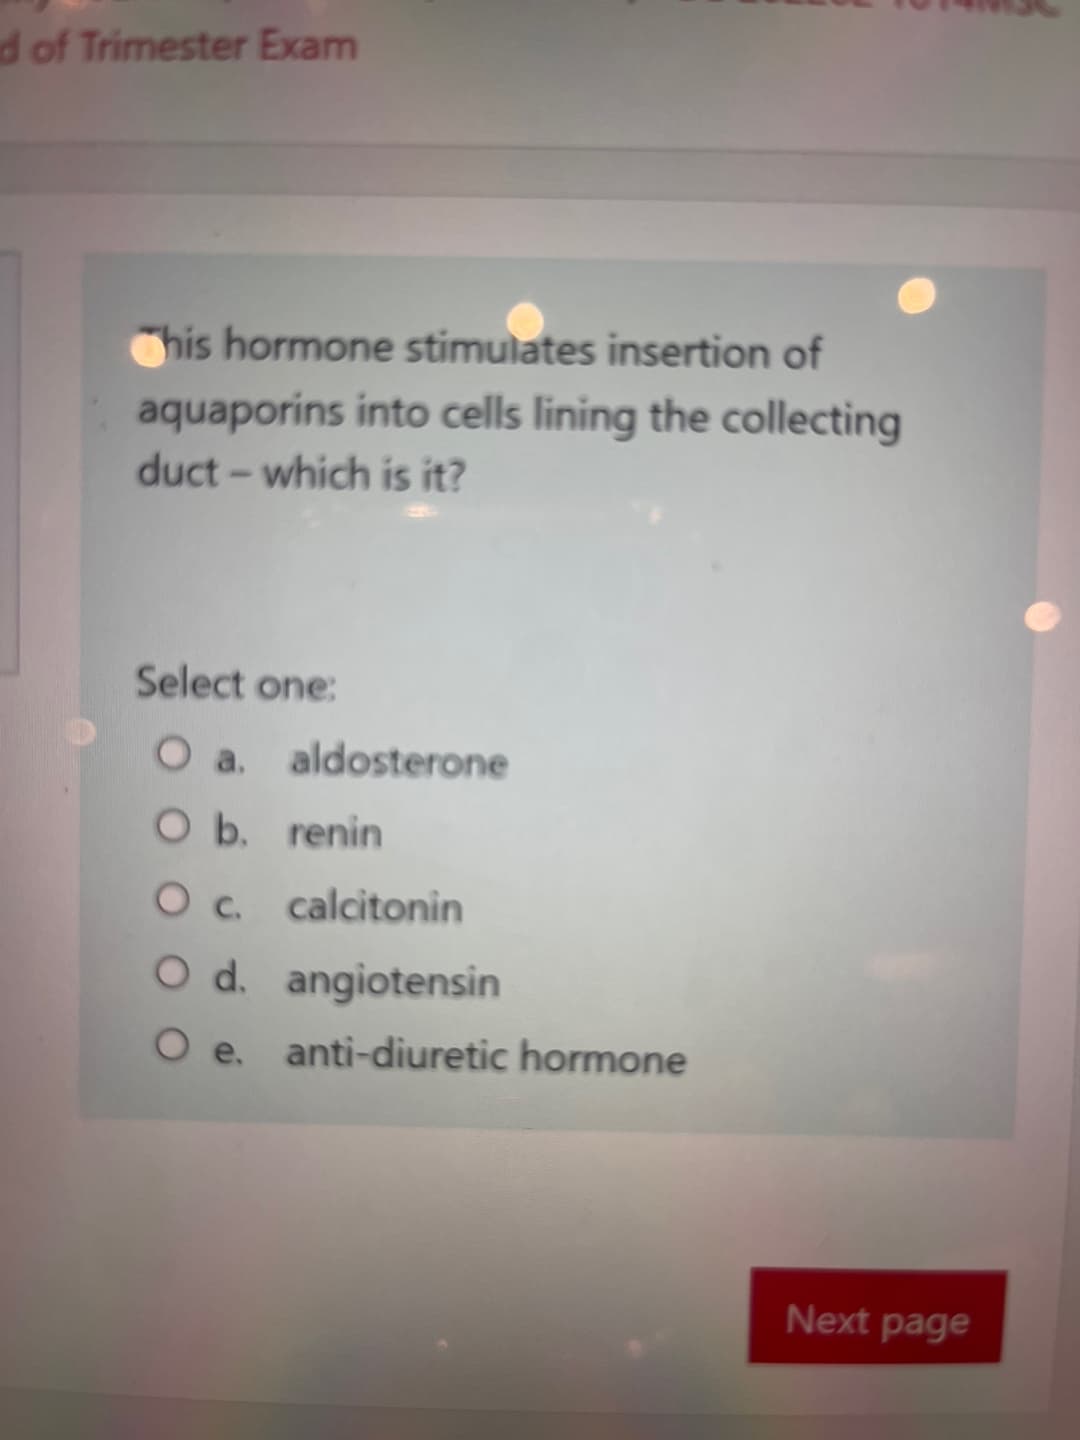 d of Trimester Exam
his hormone stimulates insertion of
aquaporins into cells lining the collecting
duct - which is it?
Select one:
O a.
aldosterone
O b.
renin
O c.
calcitonin
O d. angiotensin
O e. anti-diuretic hormone
Next page